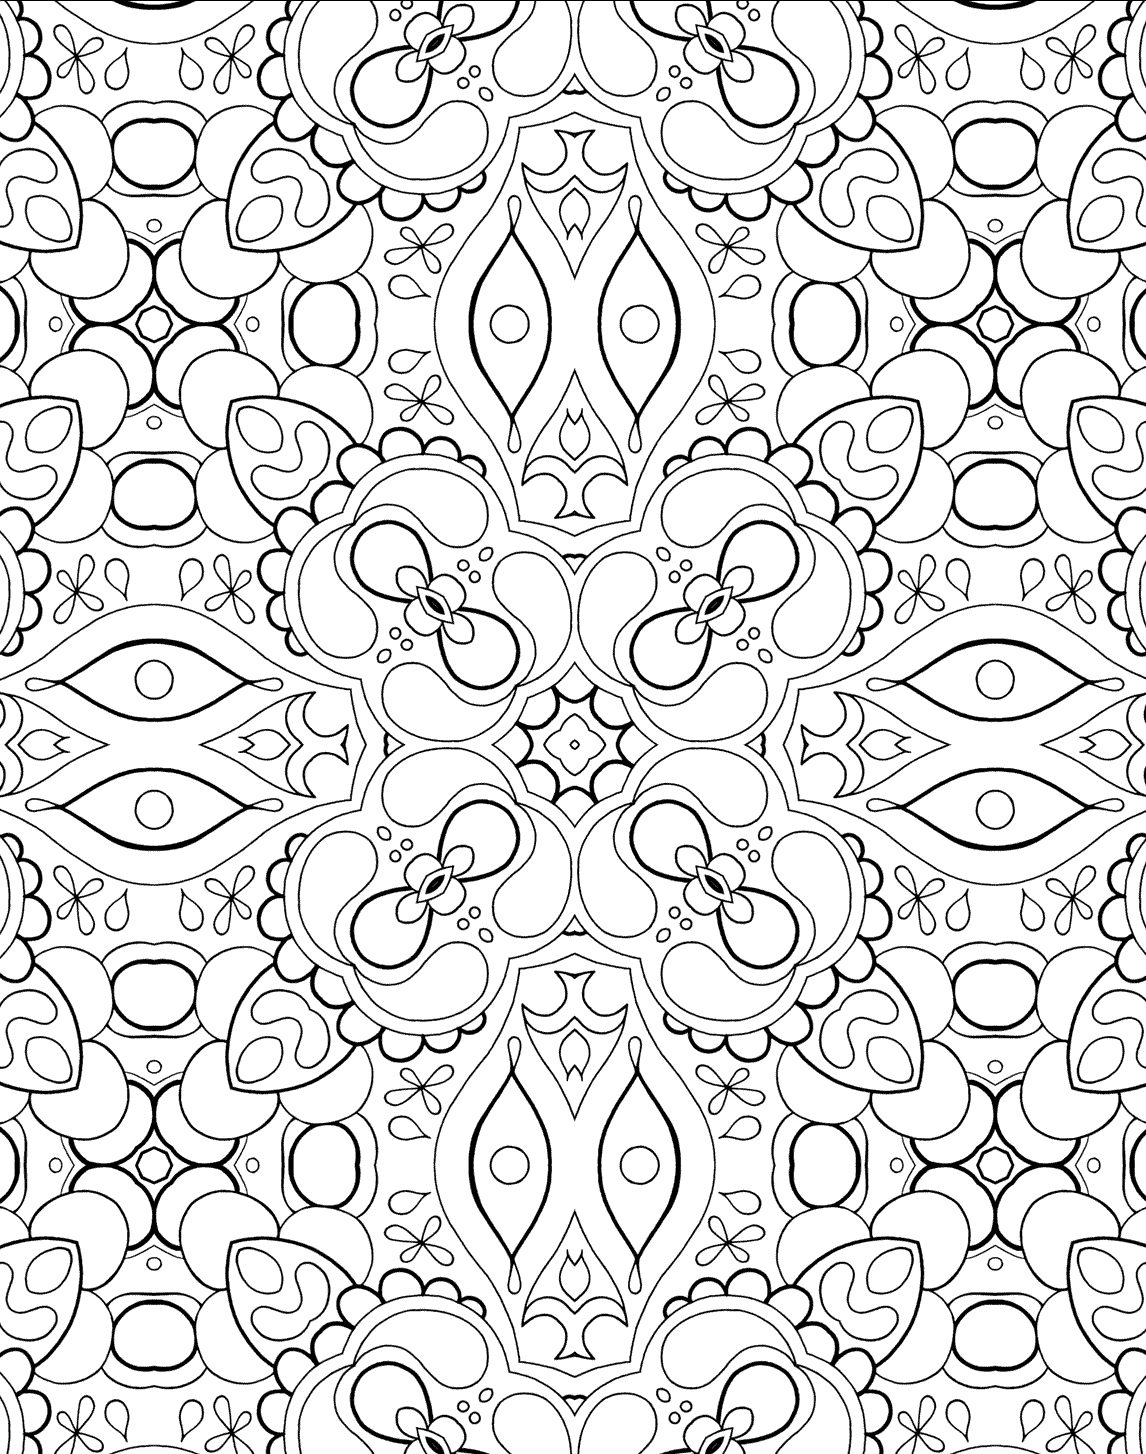 3 Nature Mindful Colouring Sheets Designs & Graphics